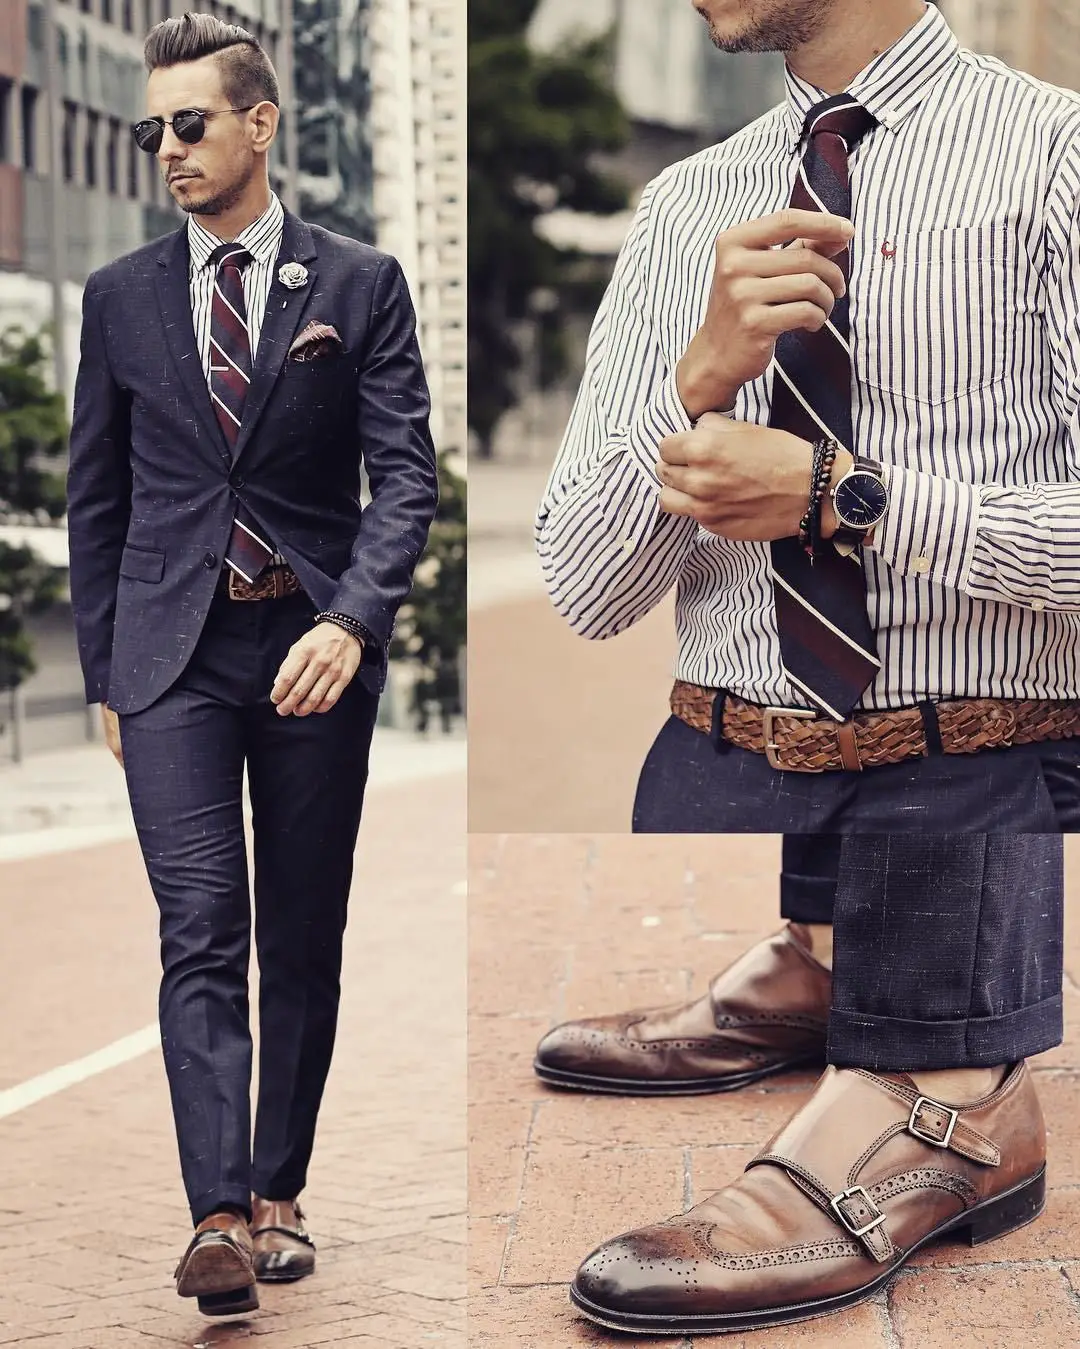 How To Match Suit, Accessories &  Footwear The Right Way